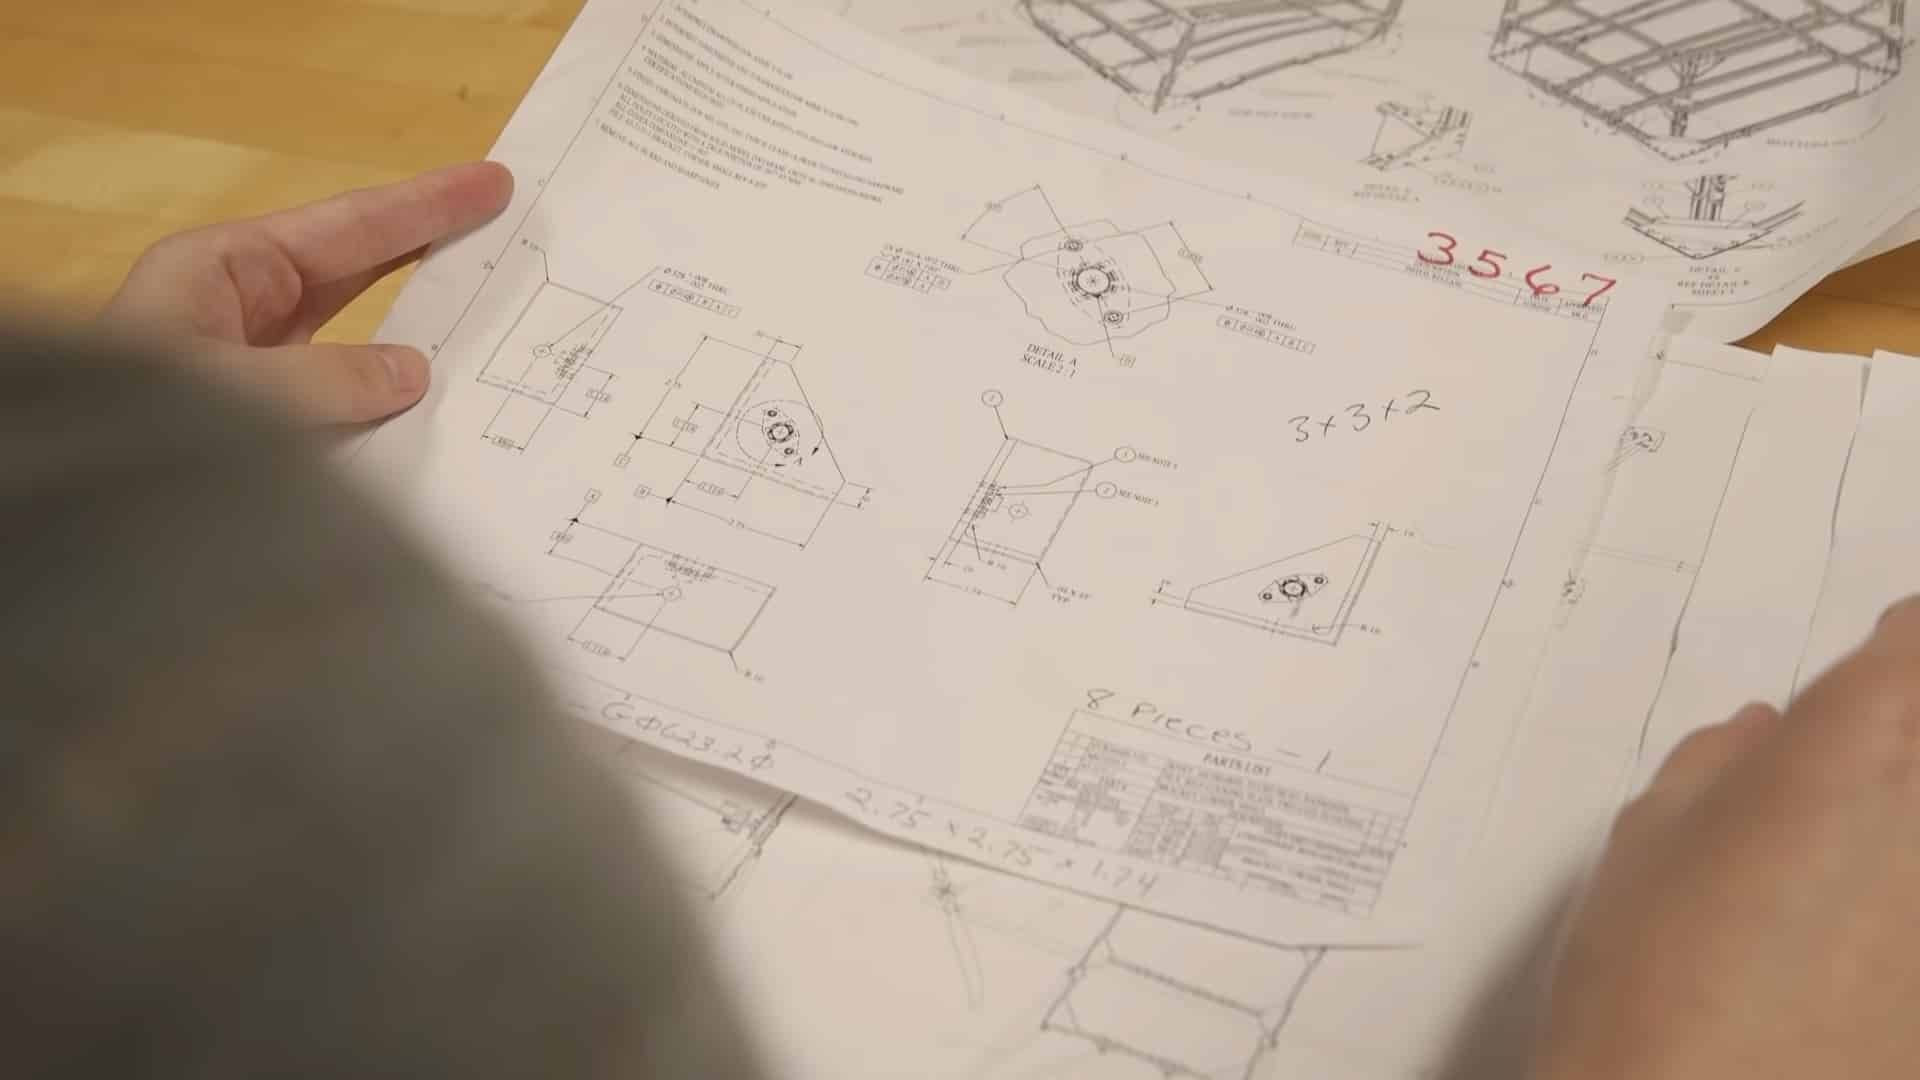 Blueprints for the canceled solar geoengineering experiment David Keith was working on before he left Harvard University. (WebsEdge / YouTube)